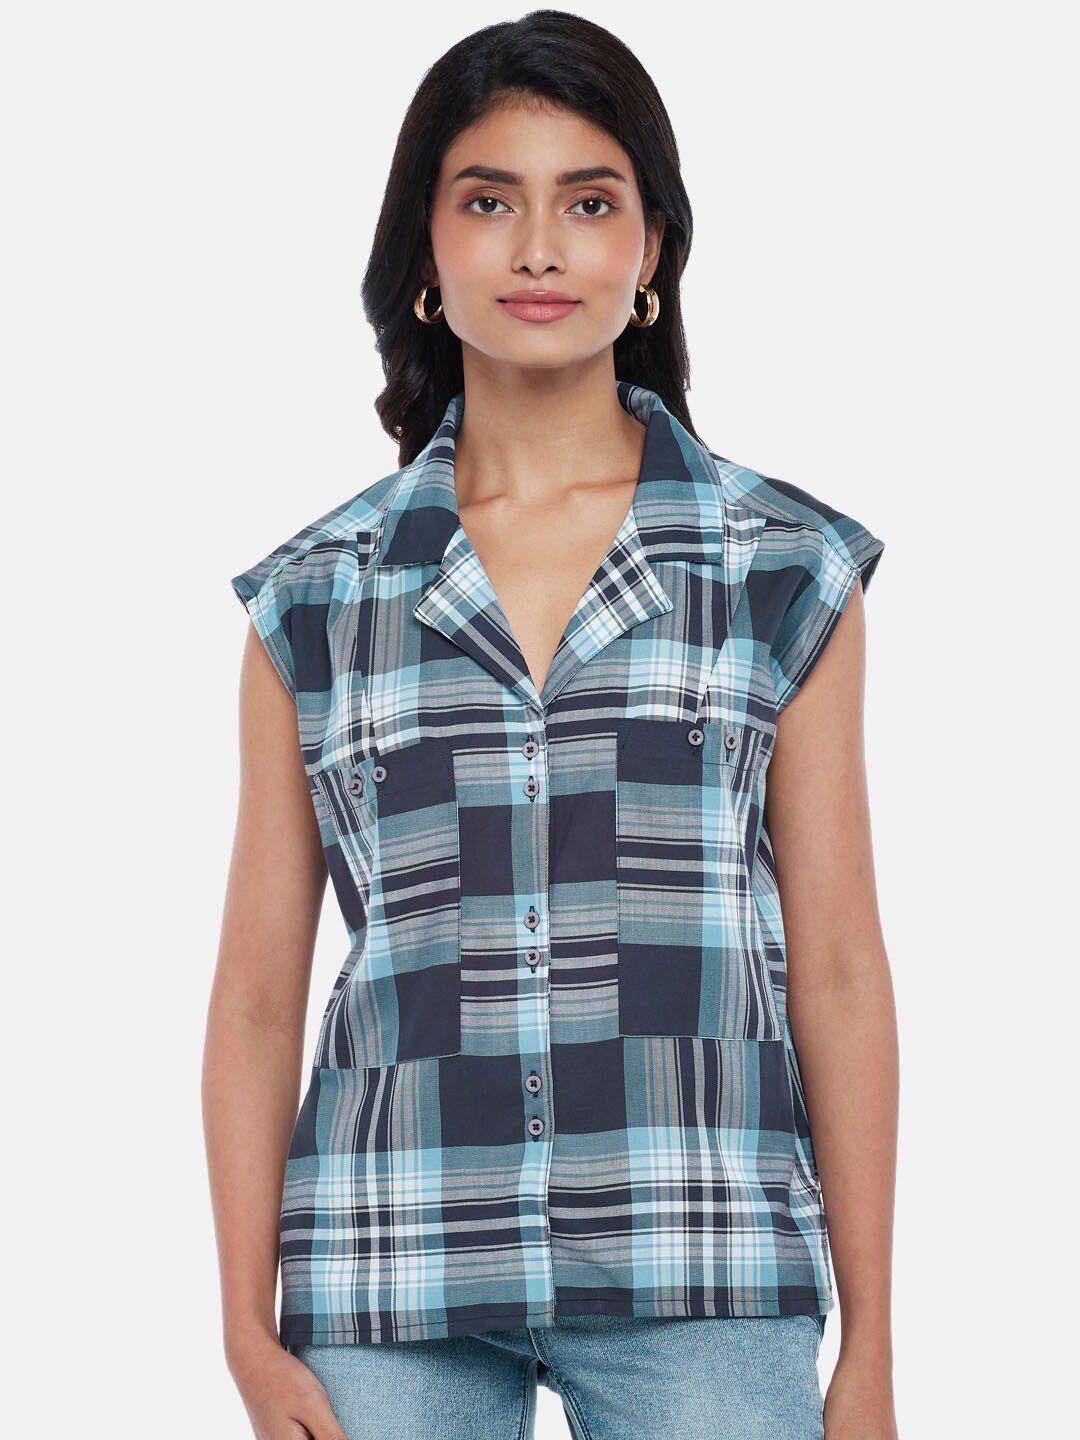 sf-jeans-by-pantaloons-women-blue-checked-casual-shirt